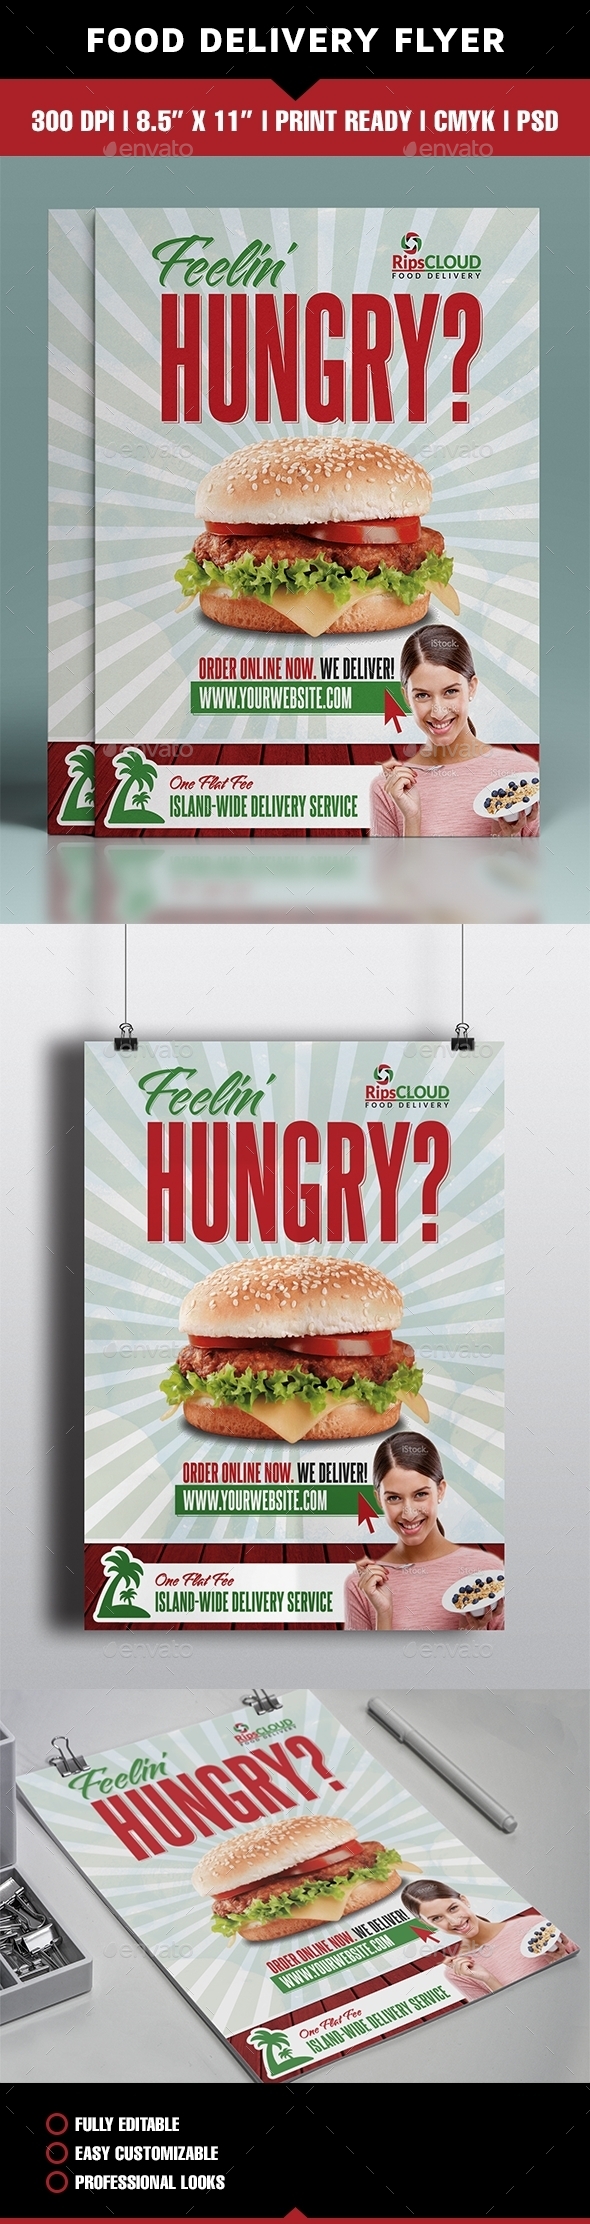 Food delivery flyer